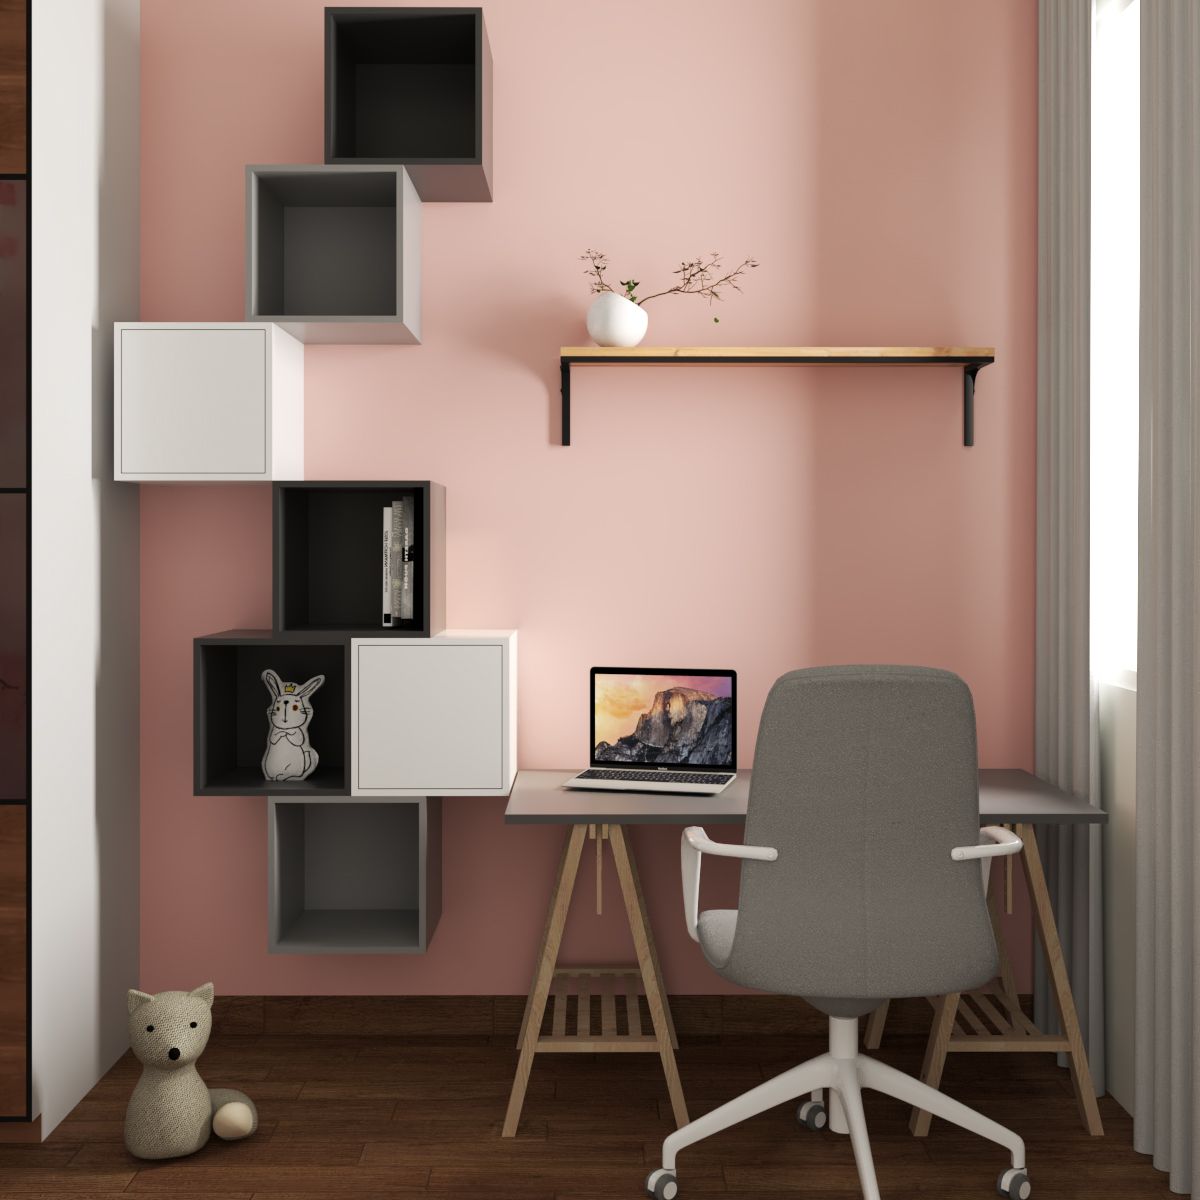 Modern Light Pink Study Room Design With Wall-Mounted Cabinet